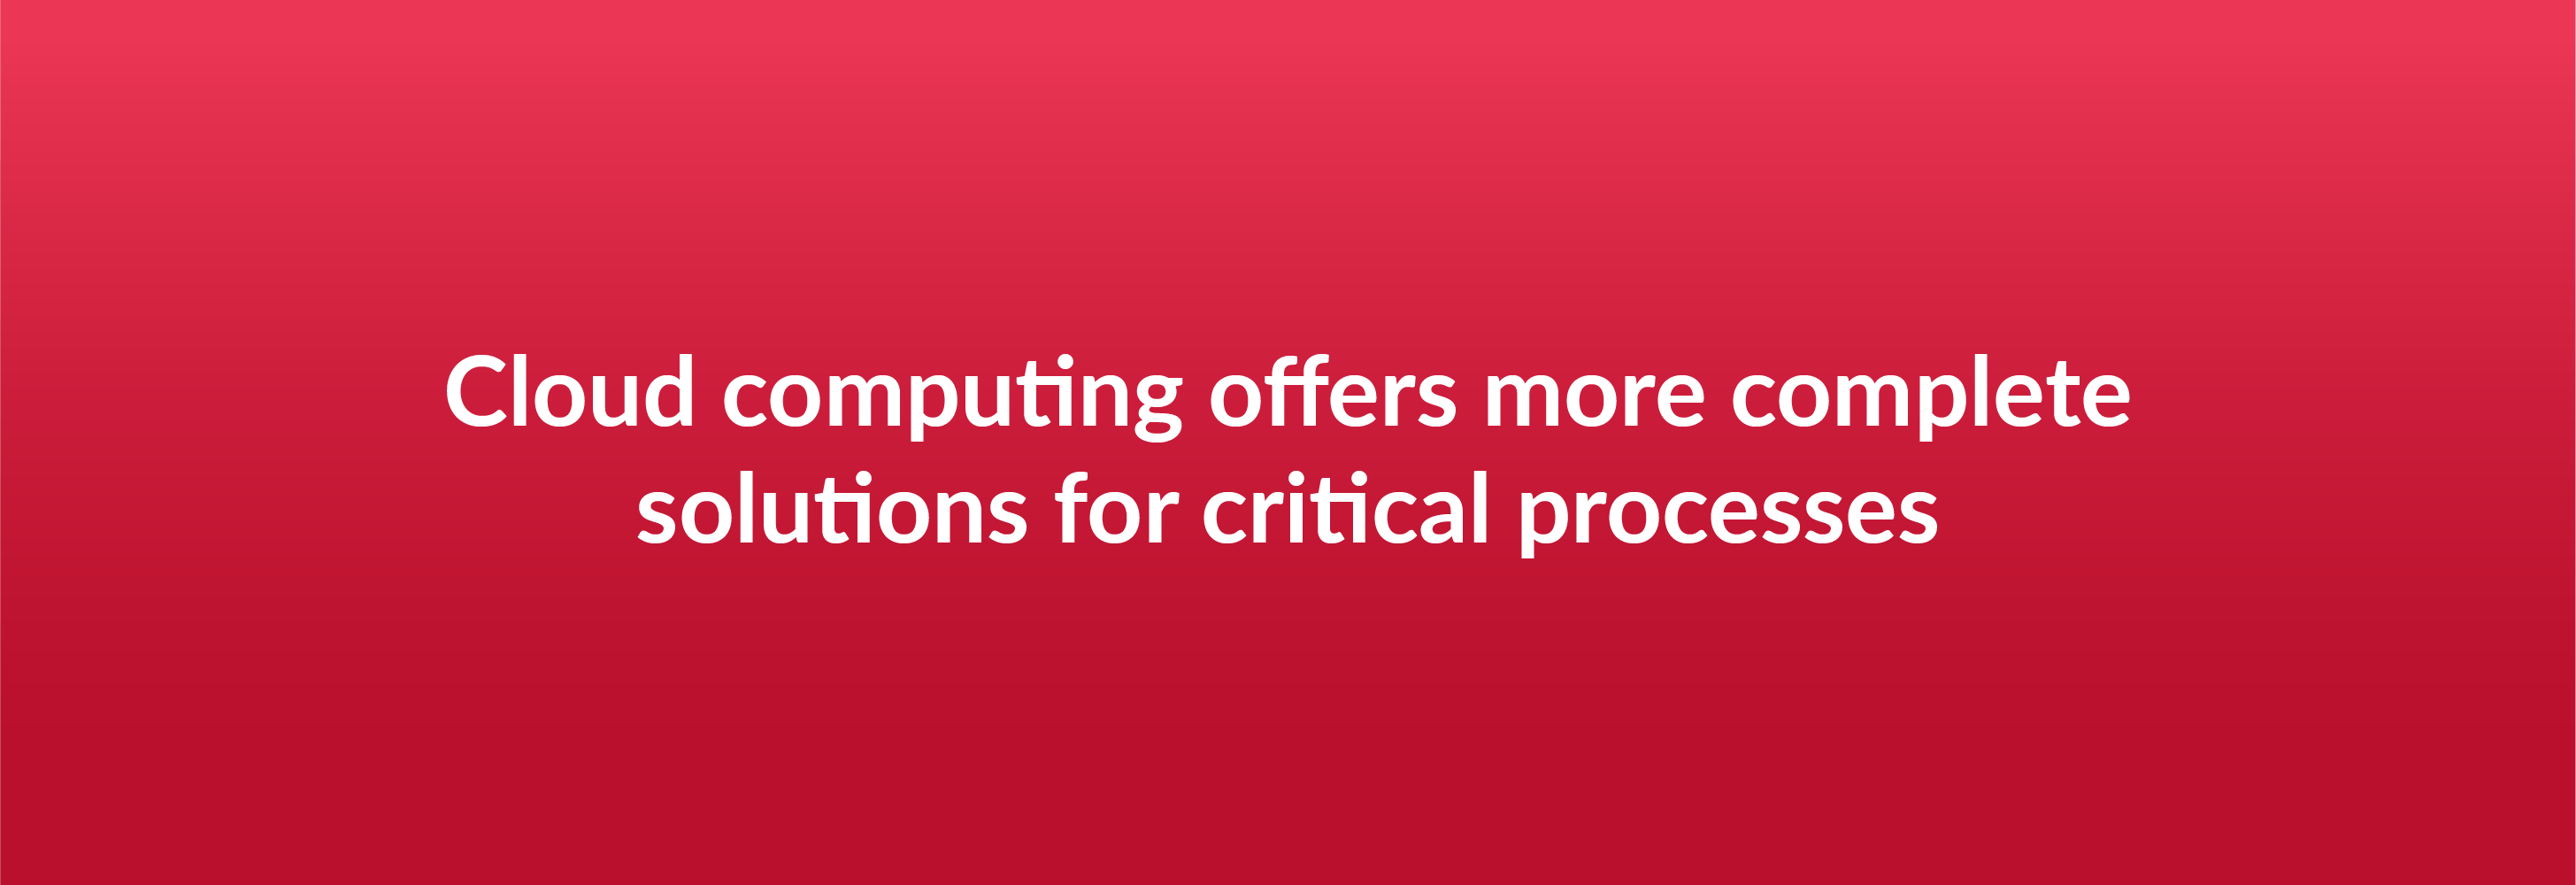 Cloud computing offers more complete solutions for critical processes